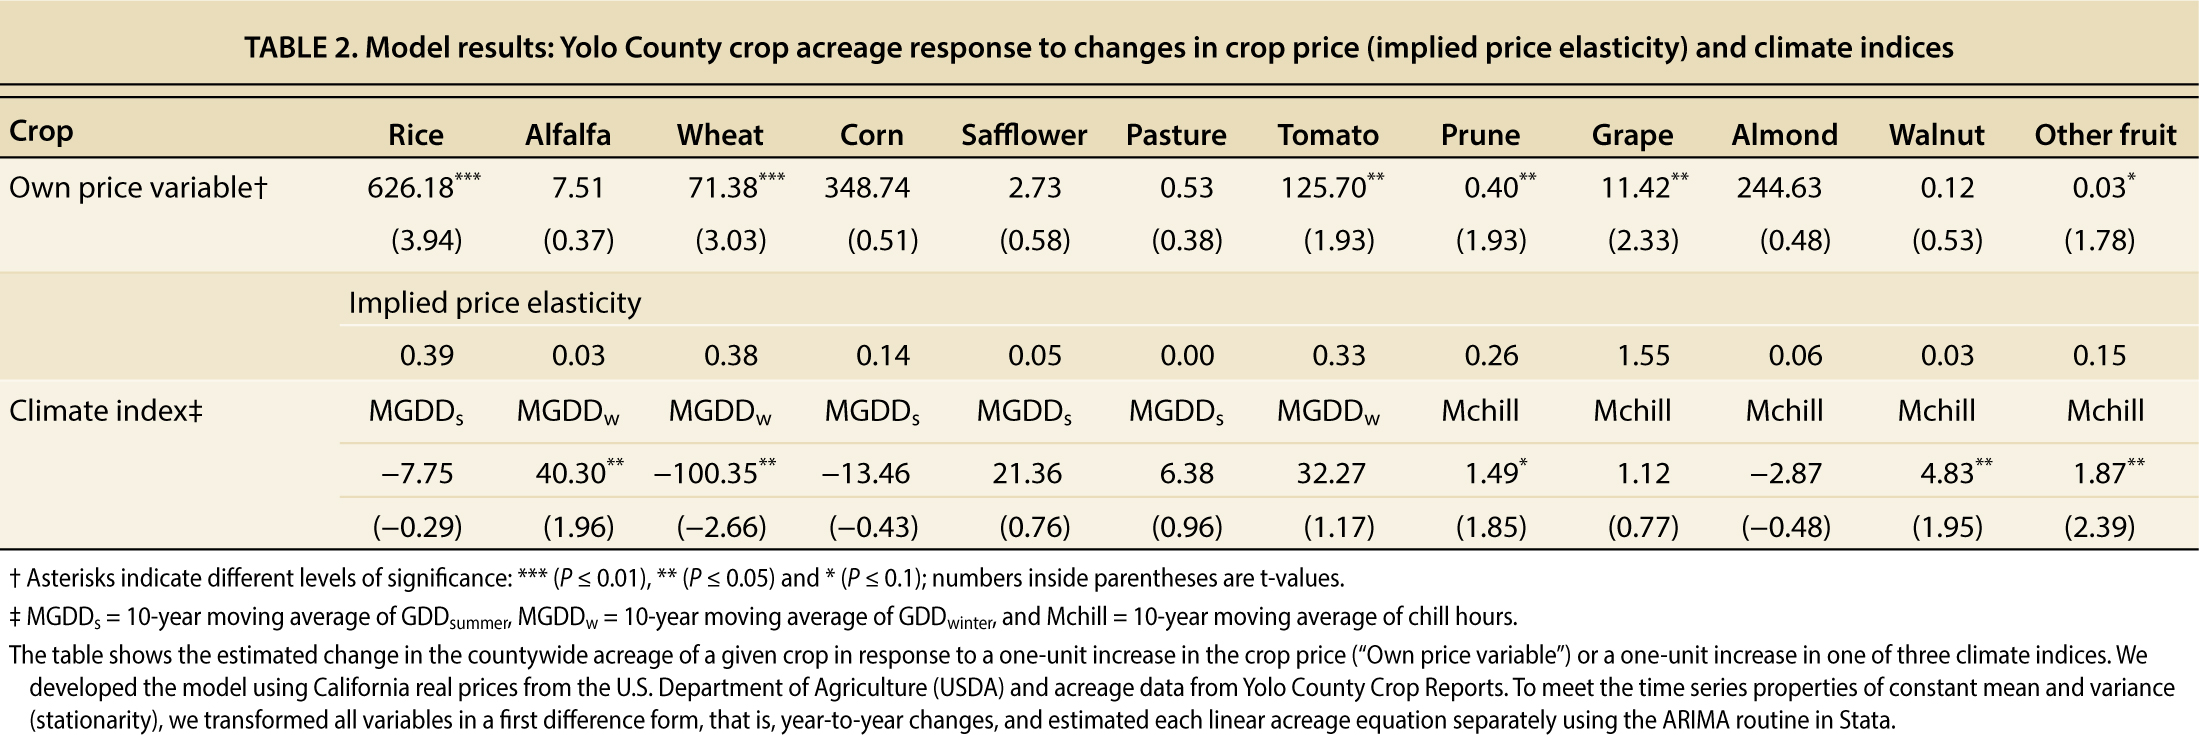 Model results: Yolo County crop acreage response to changes in crop price (implied price elasticity) and climate indices